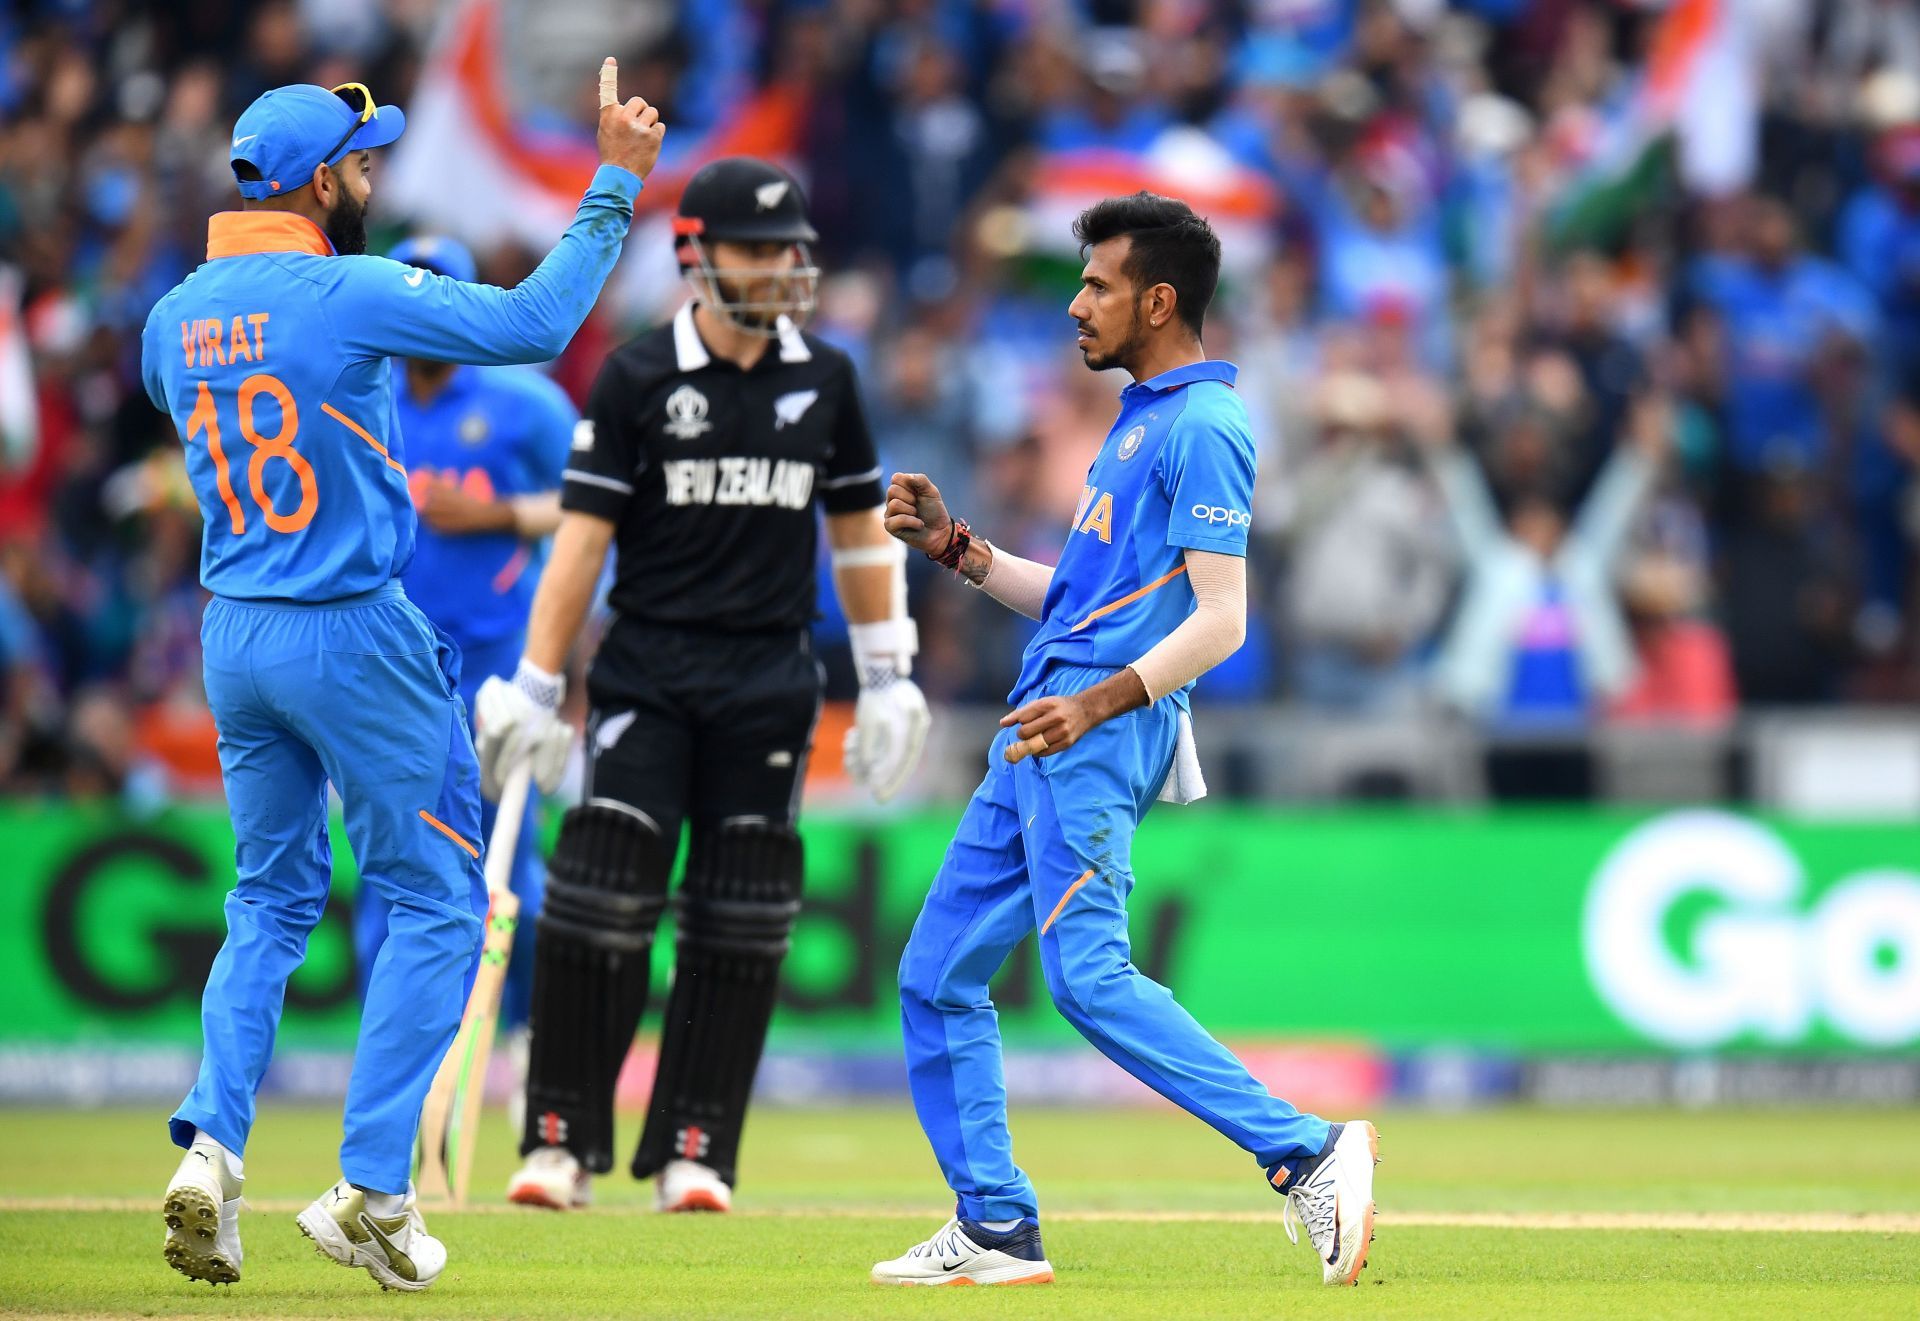 Chahal has been versatile for India